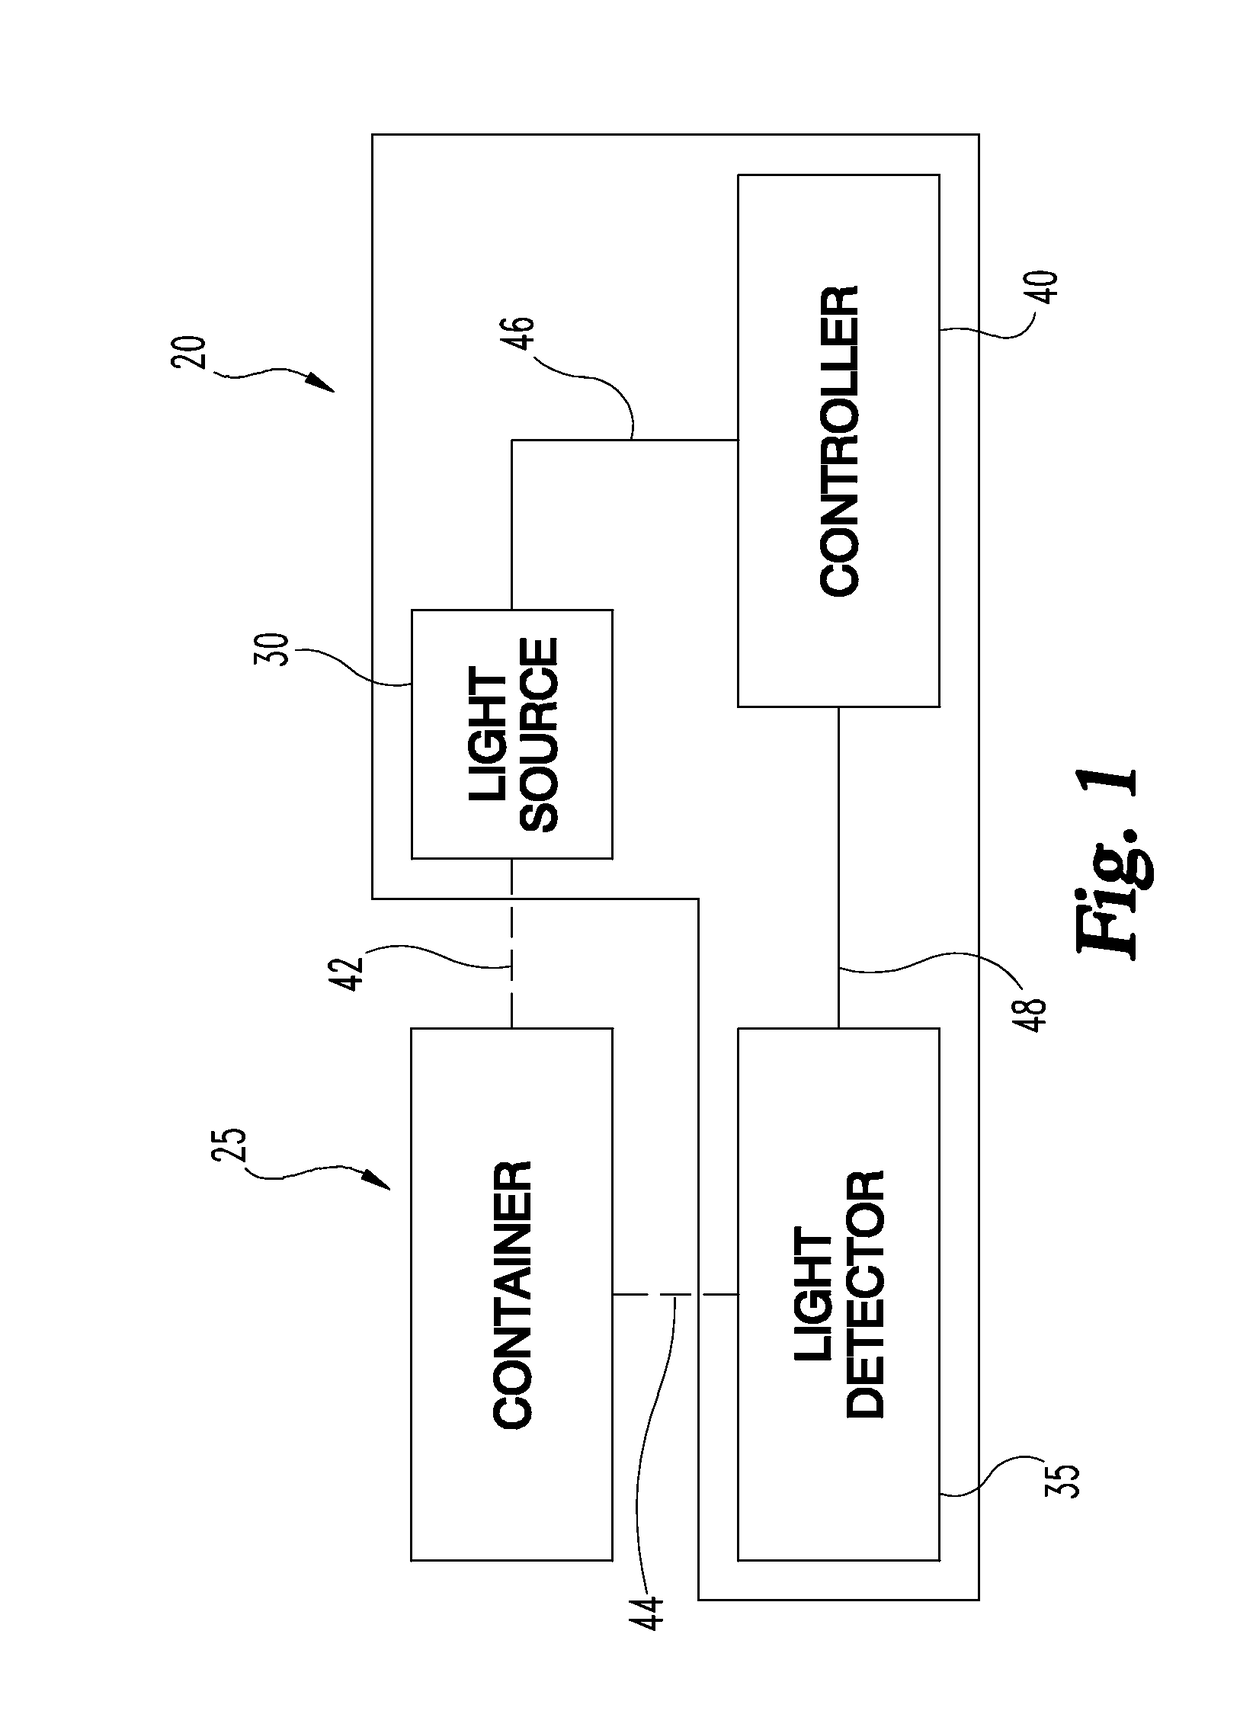 Sensing system for detecting a piston in a medical fluid container